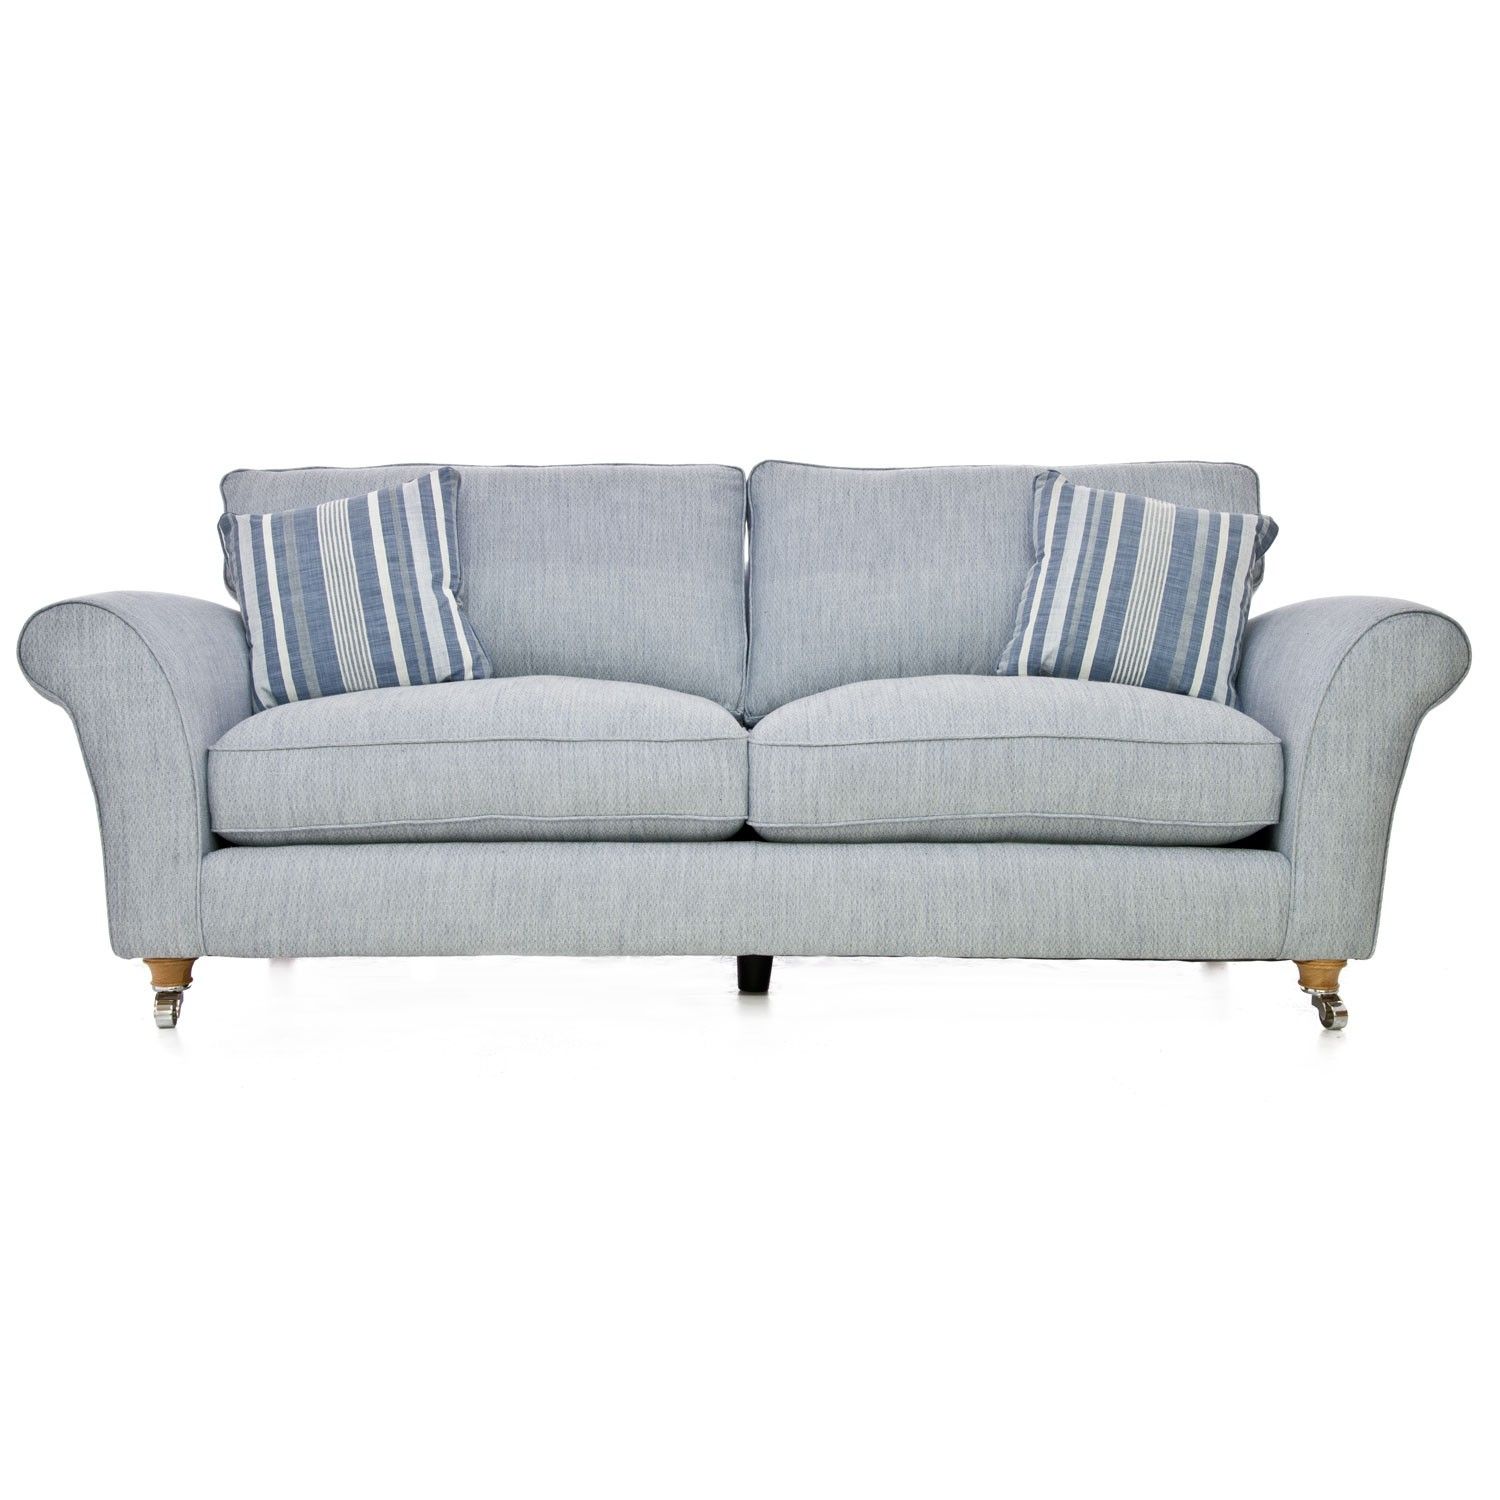 Chatsworth 4 Seater Sofa 4 Seat Chambray With 4 Seat Couch (View 13 of 15)